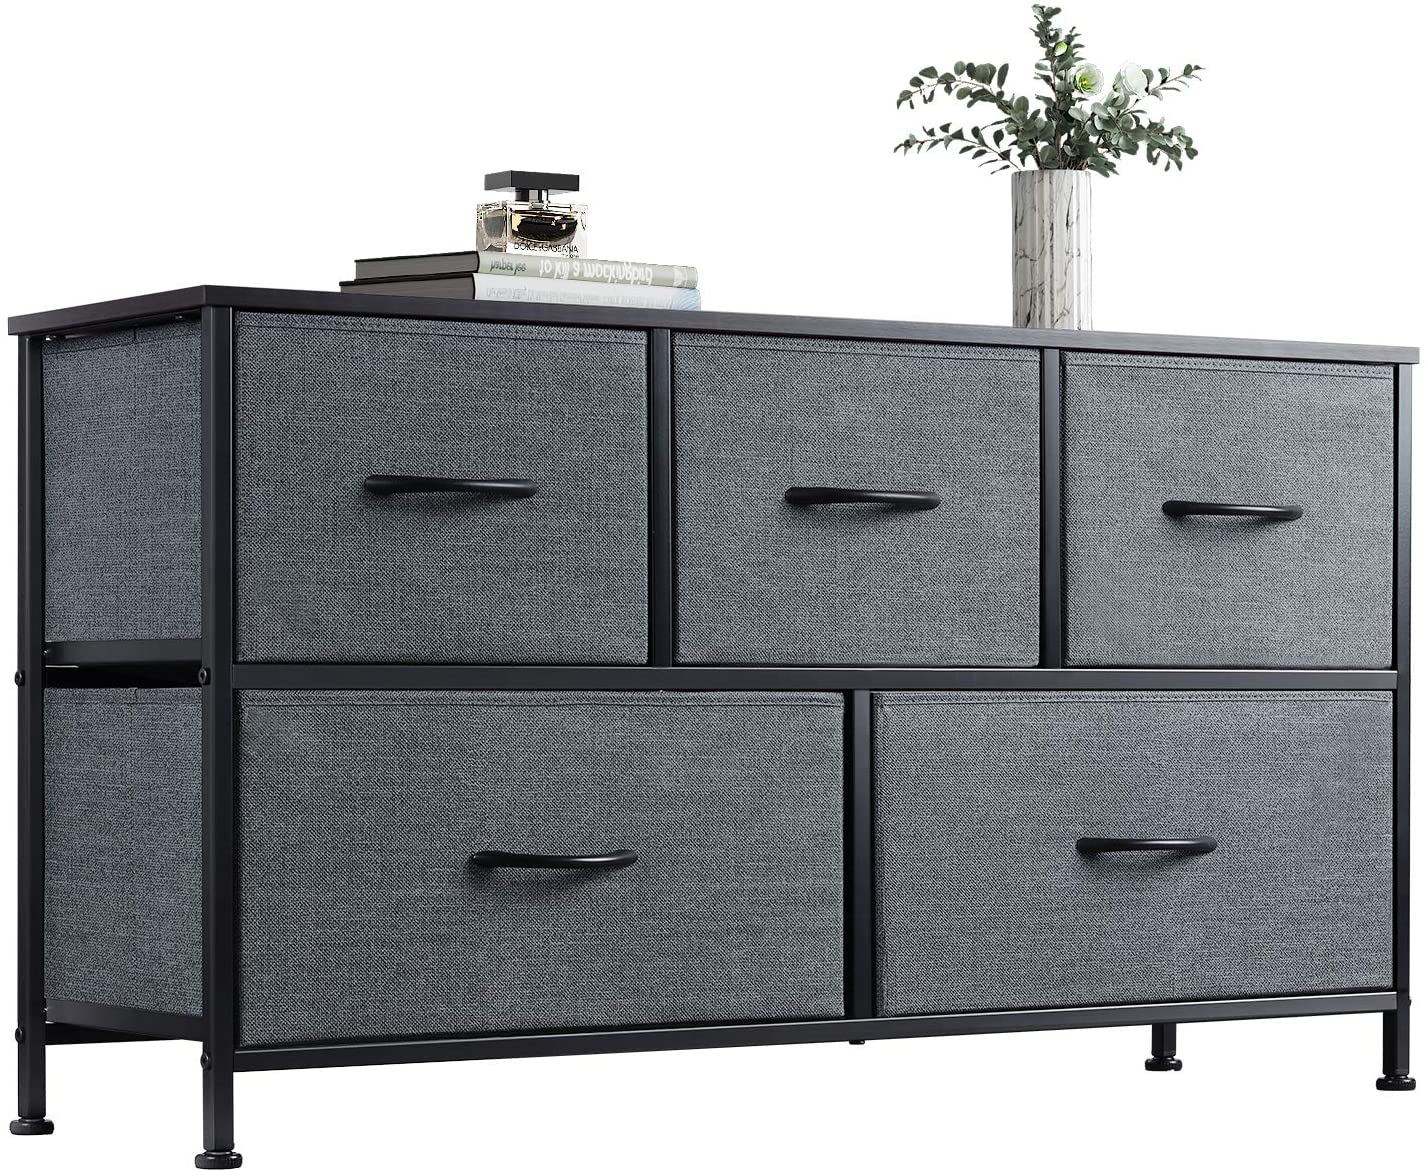 WLIVE Dresser with 5 Drawers